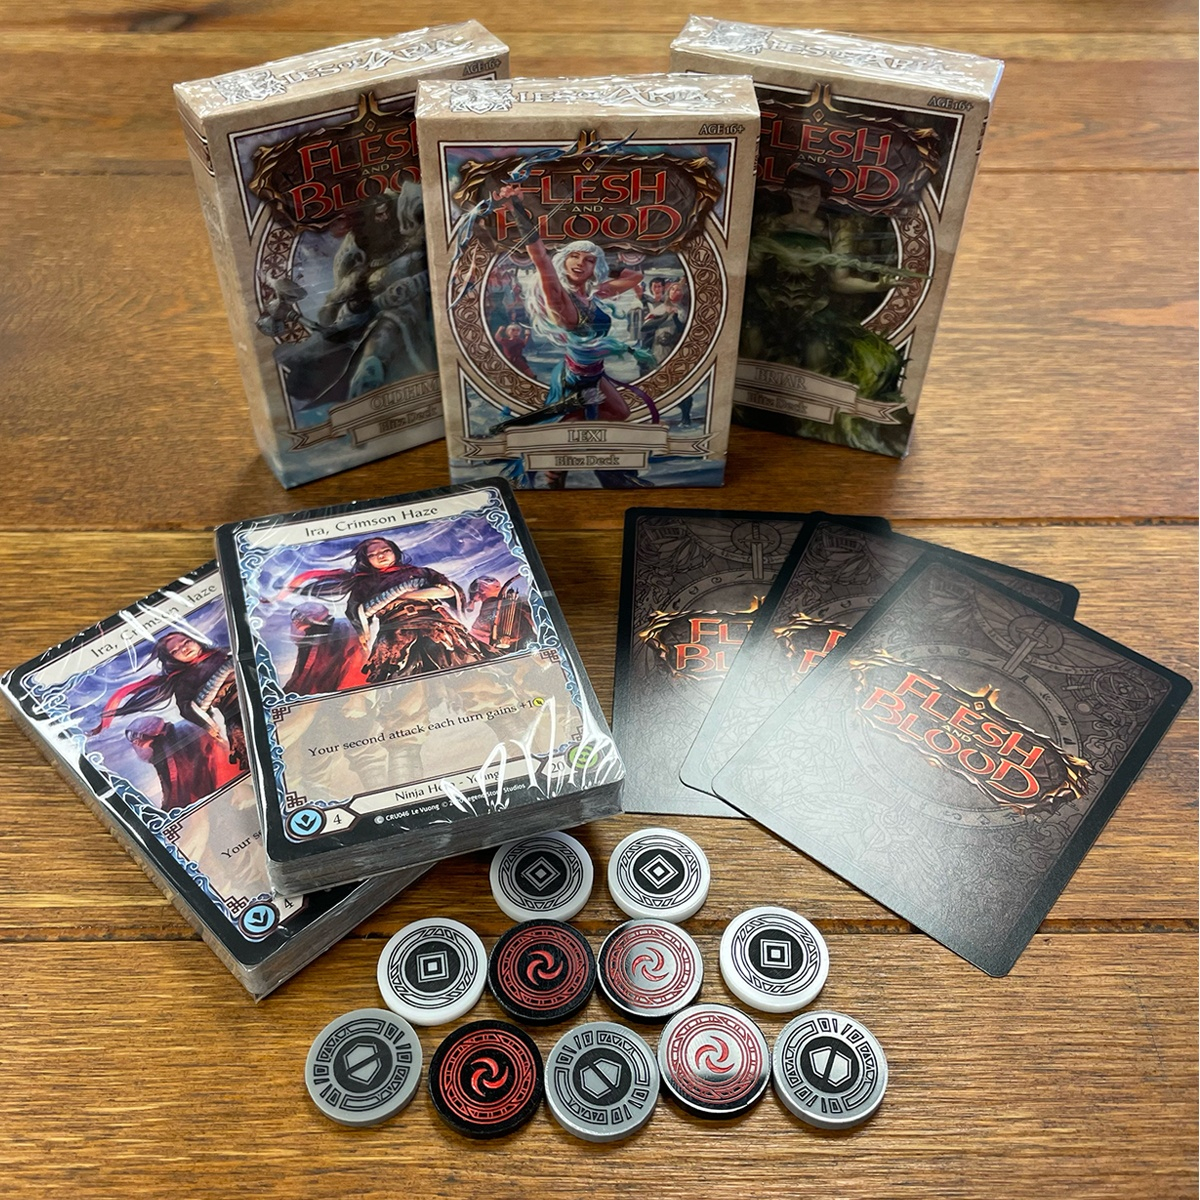 Oldhim, Lexi, and Briar Aria Blitz Decks, two Ira Decks, three Flesh and Blood TCG card backs denoting three random Flesh and Blood TCG promos, and a full set of Majestic tokens on a wooden table